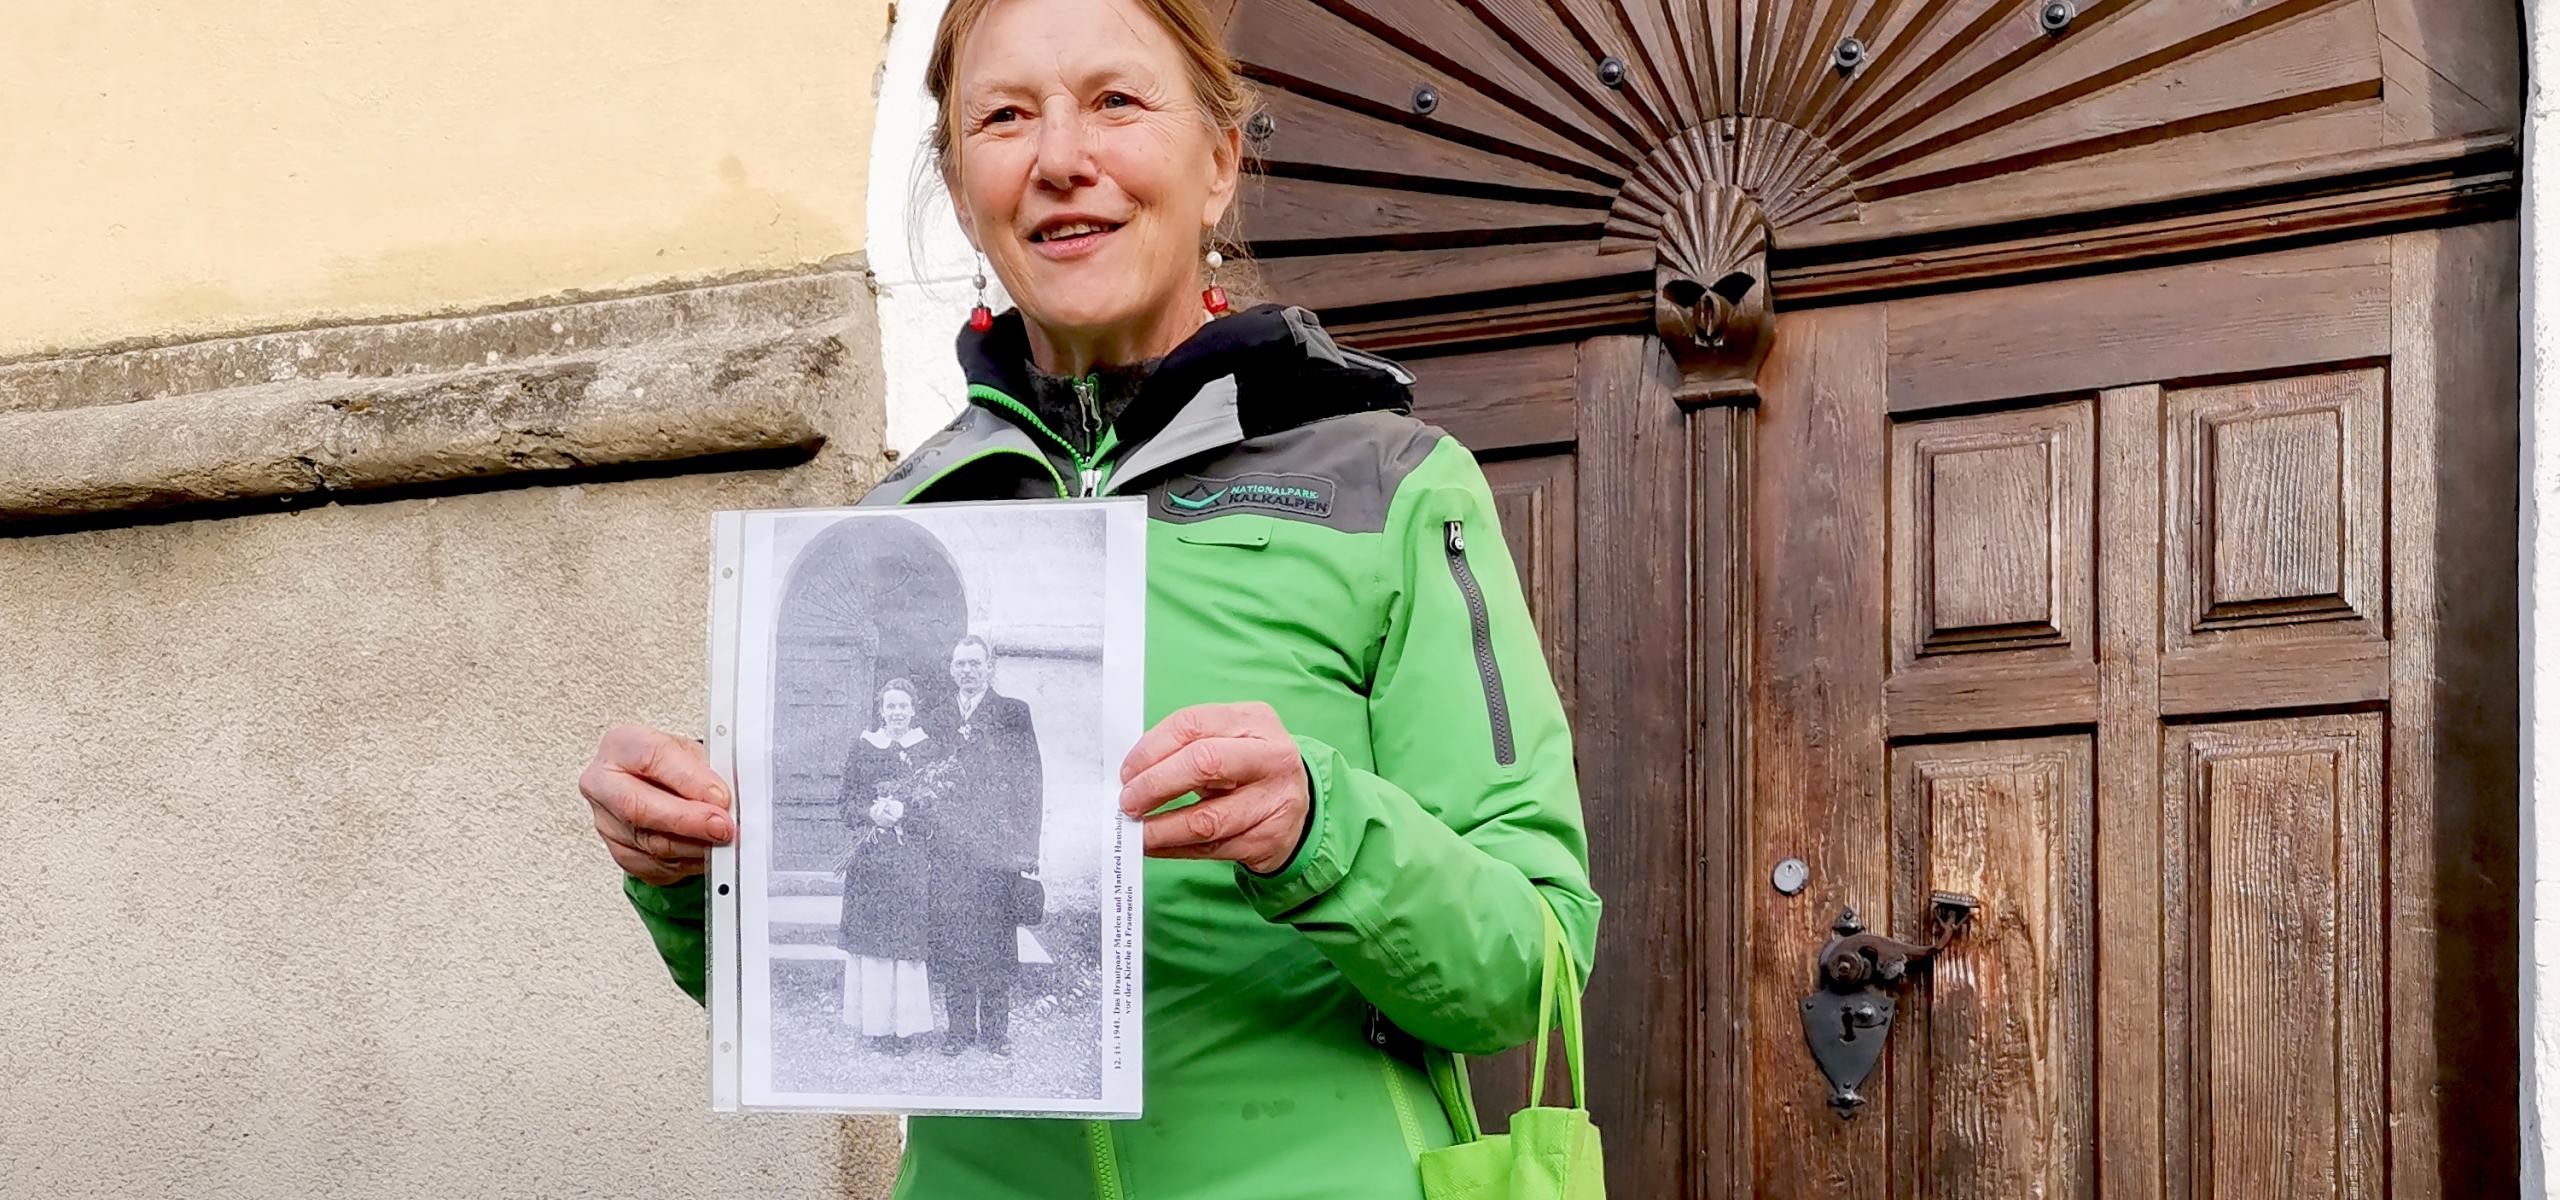 Ranger stands in front of the church portal showing the old wedding photo of Marlen Haushofer in her hand